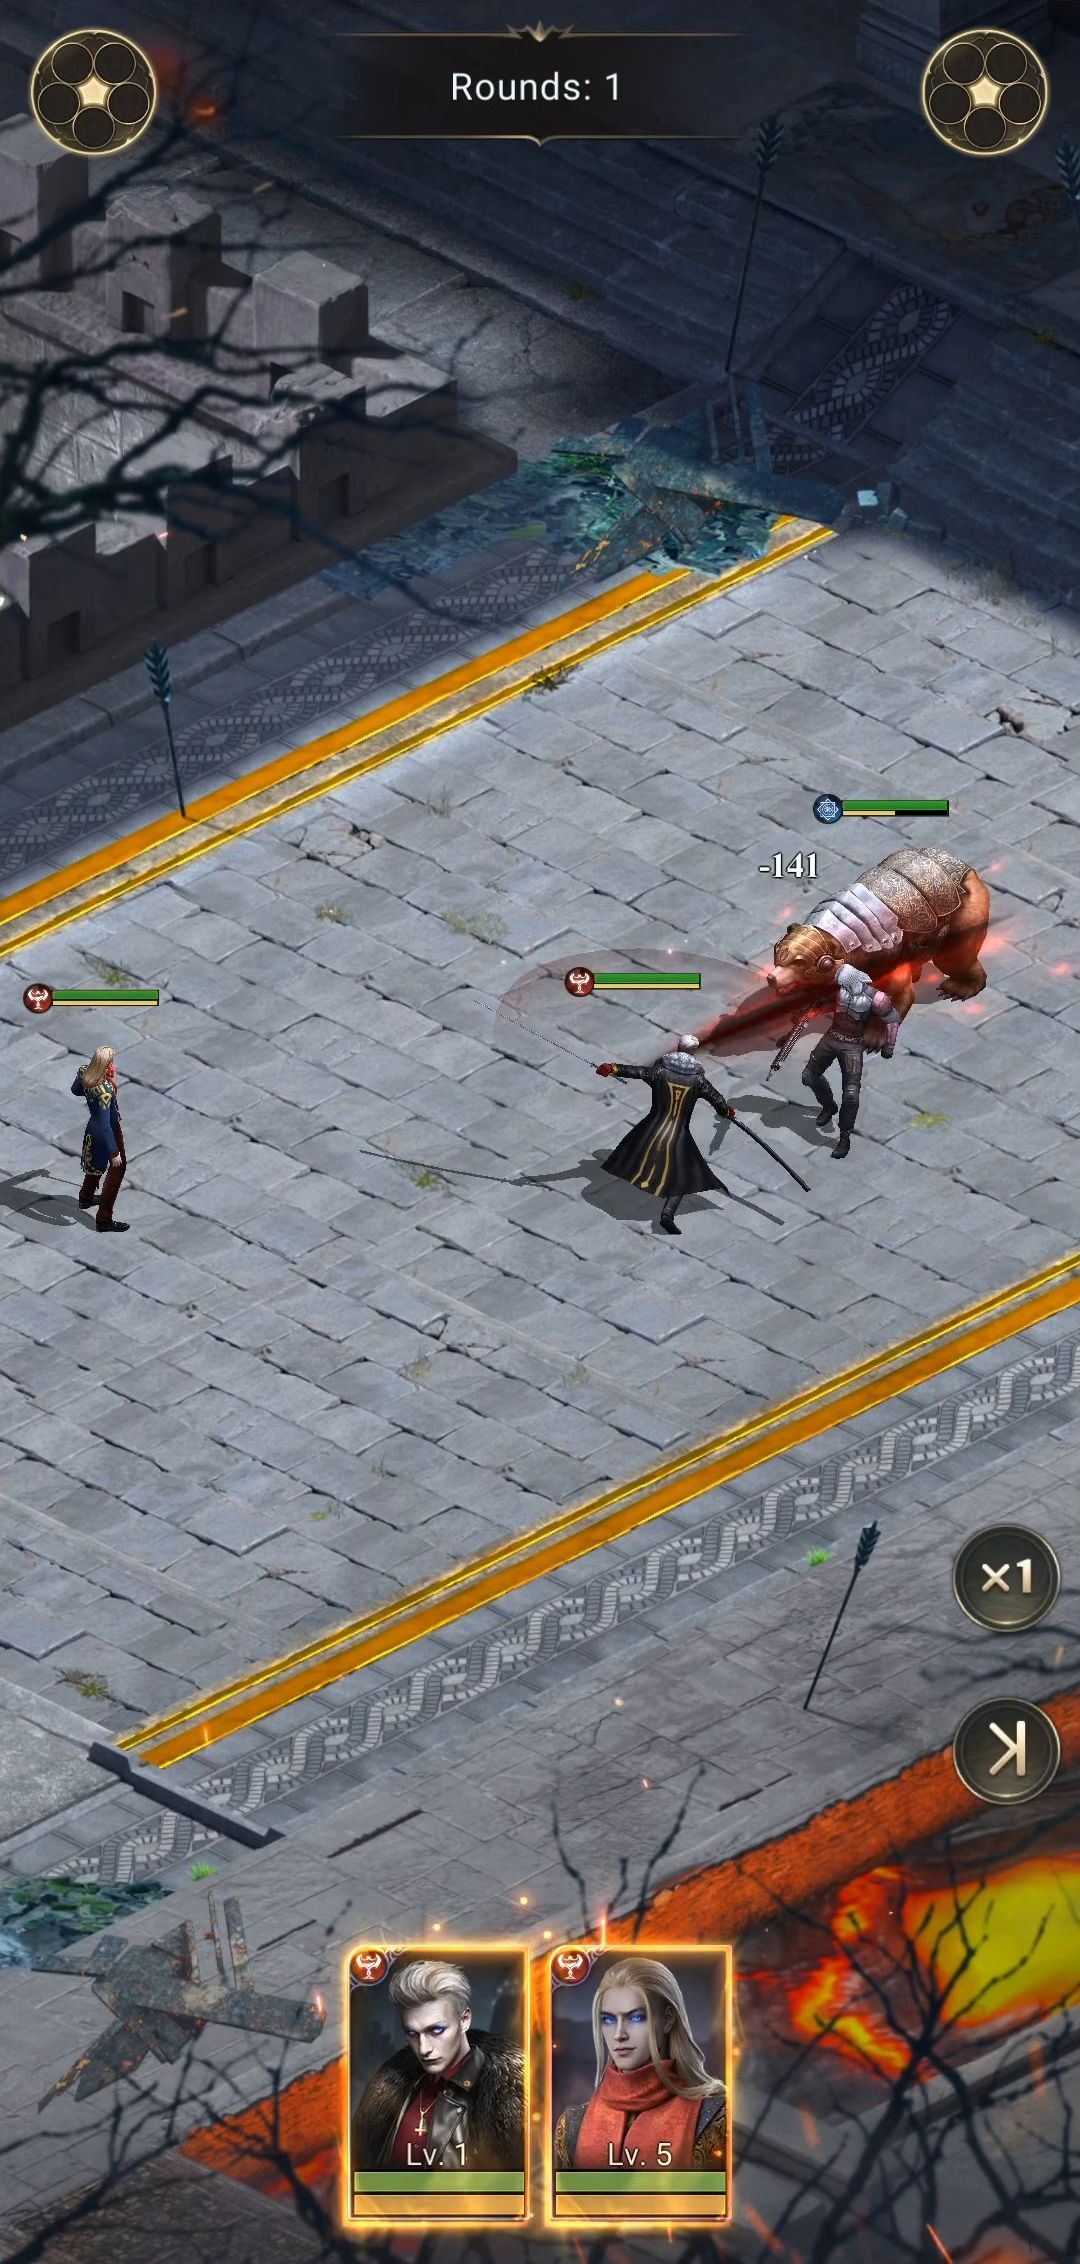 Nations of Darkness - Android game screenshots.